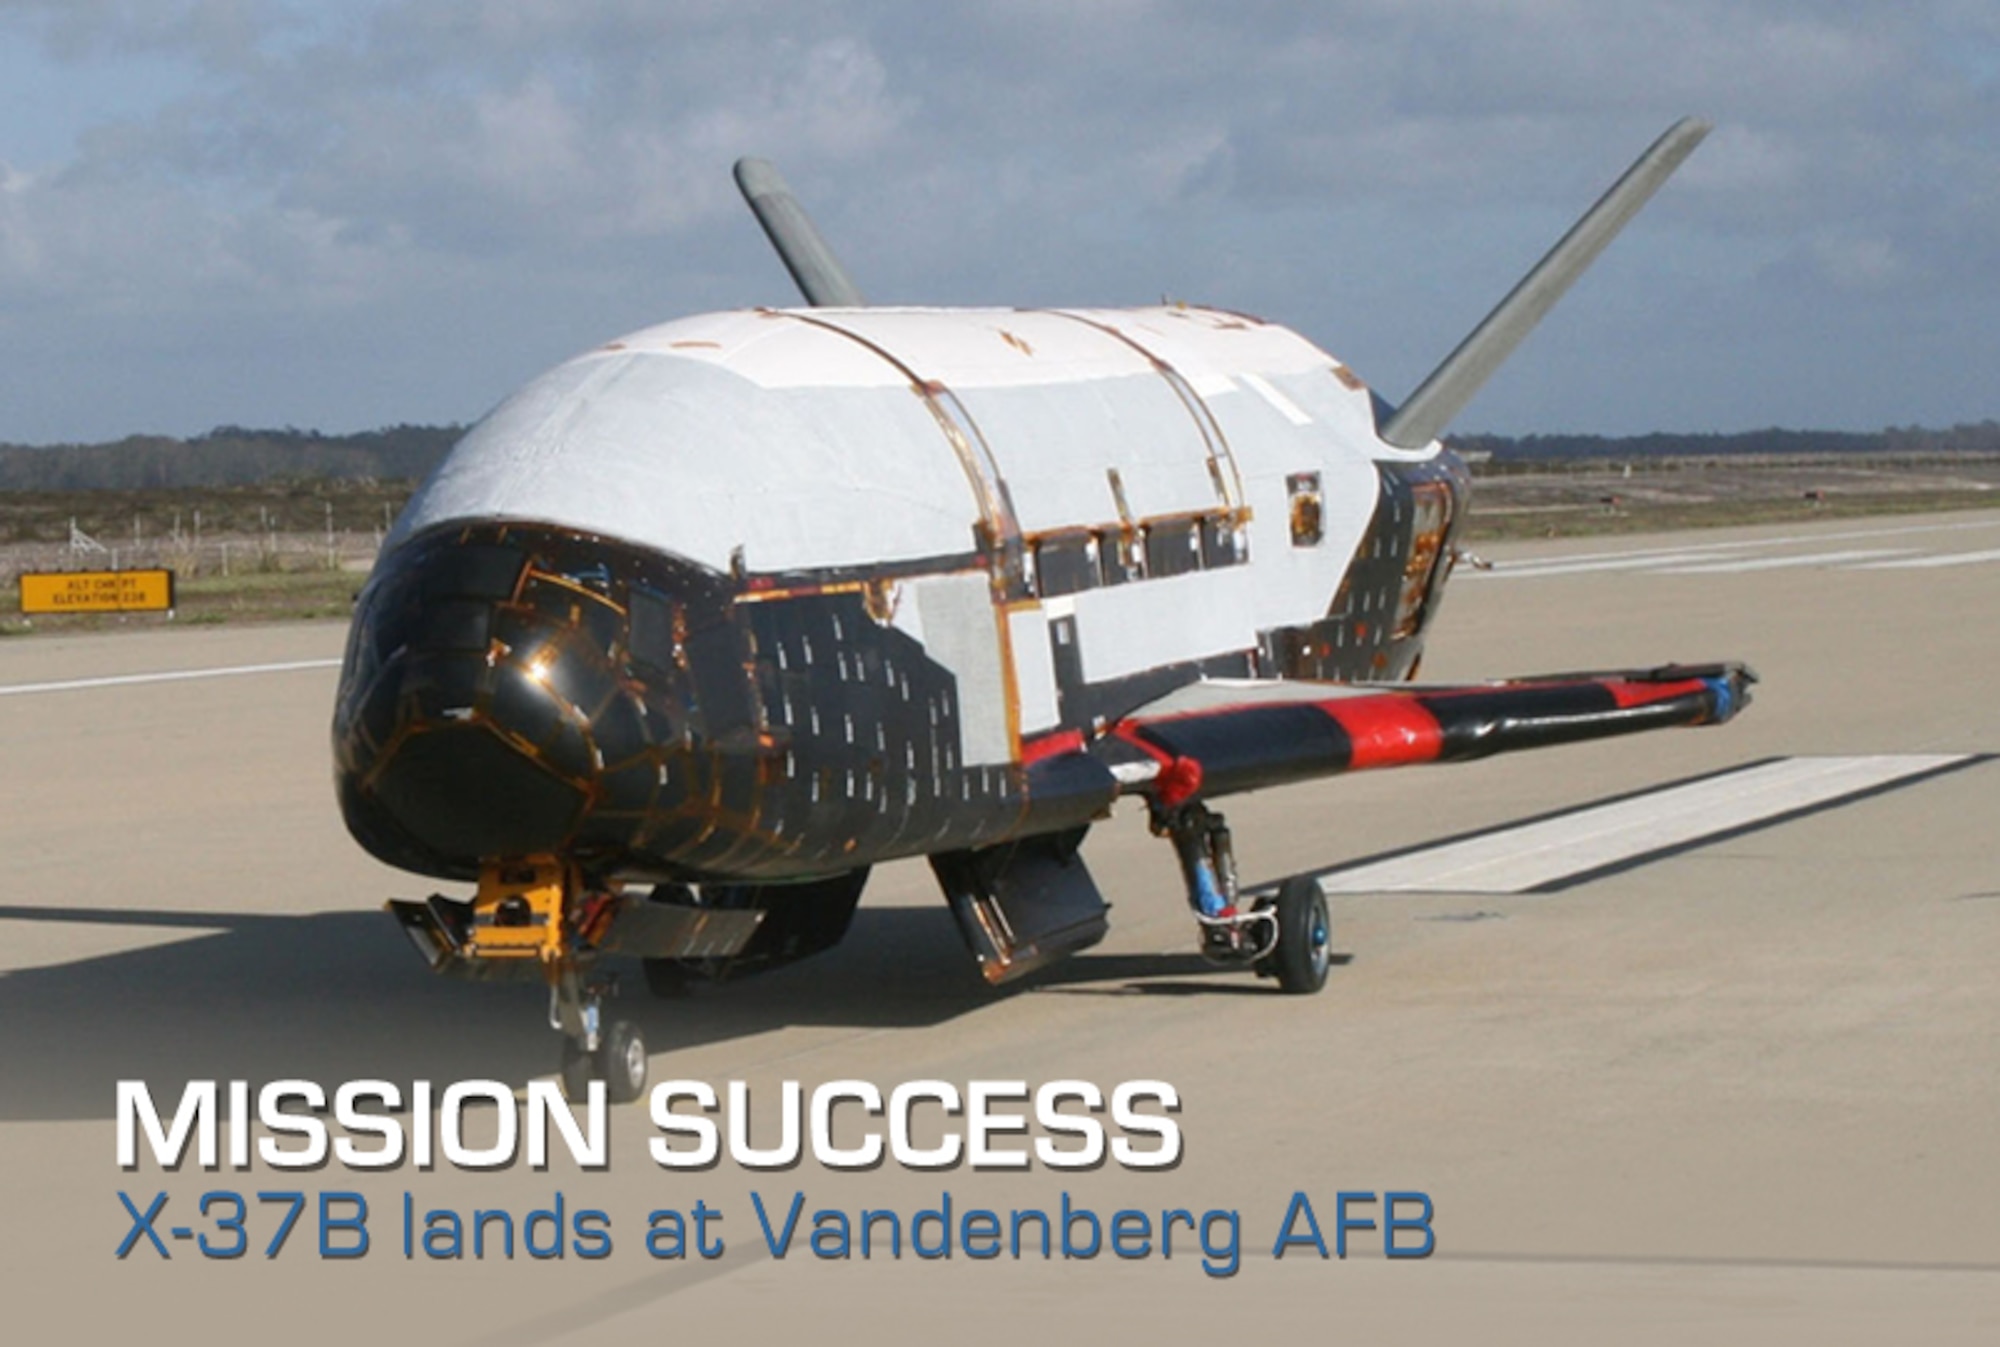 The Air Force's unmanned, reusable space plane landed in the early morning of June 16 at Vandenberg Air Force Base, Calif., a successful conclusion to a record-setting test-flight mission that began March 5 from Cape Canaveral Air Force Station, Fla. (U.S. Air Force file photo)